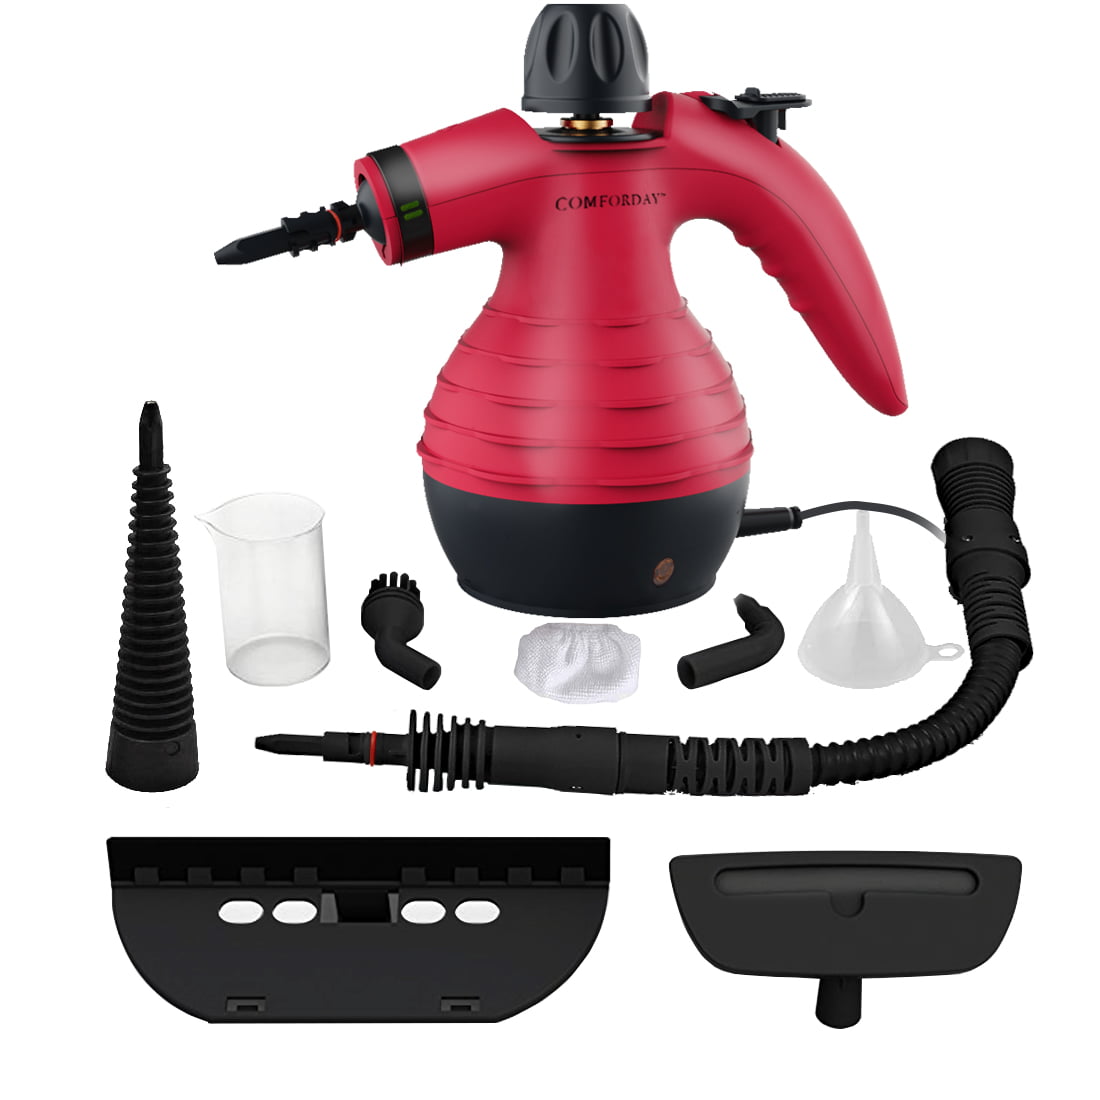 Comforday Multi-Purpose Handheld Pressurized Steam Cleaner with 9-Piece for Car 